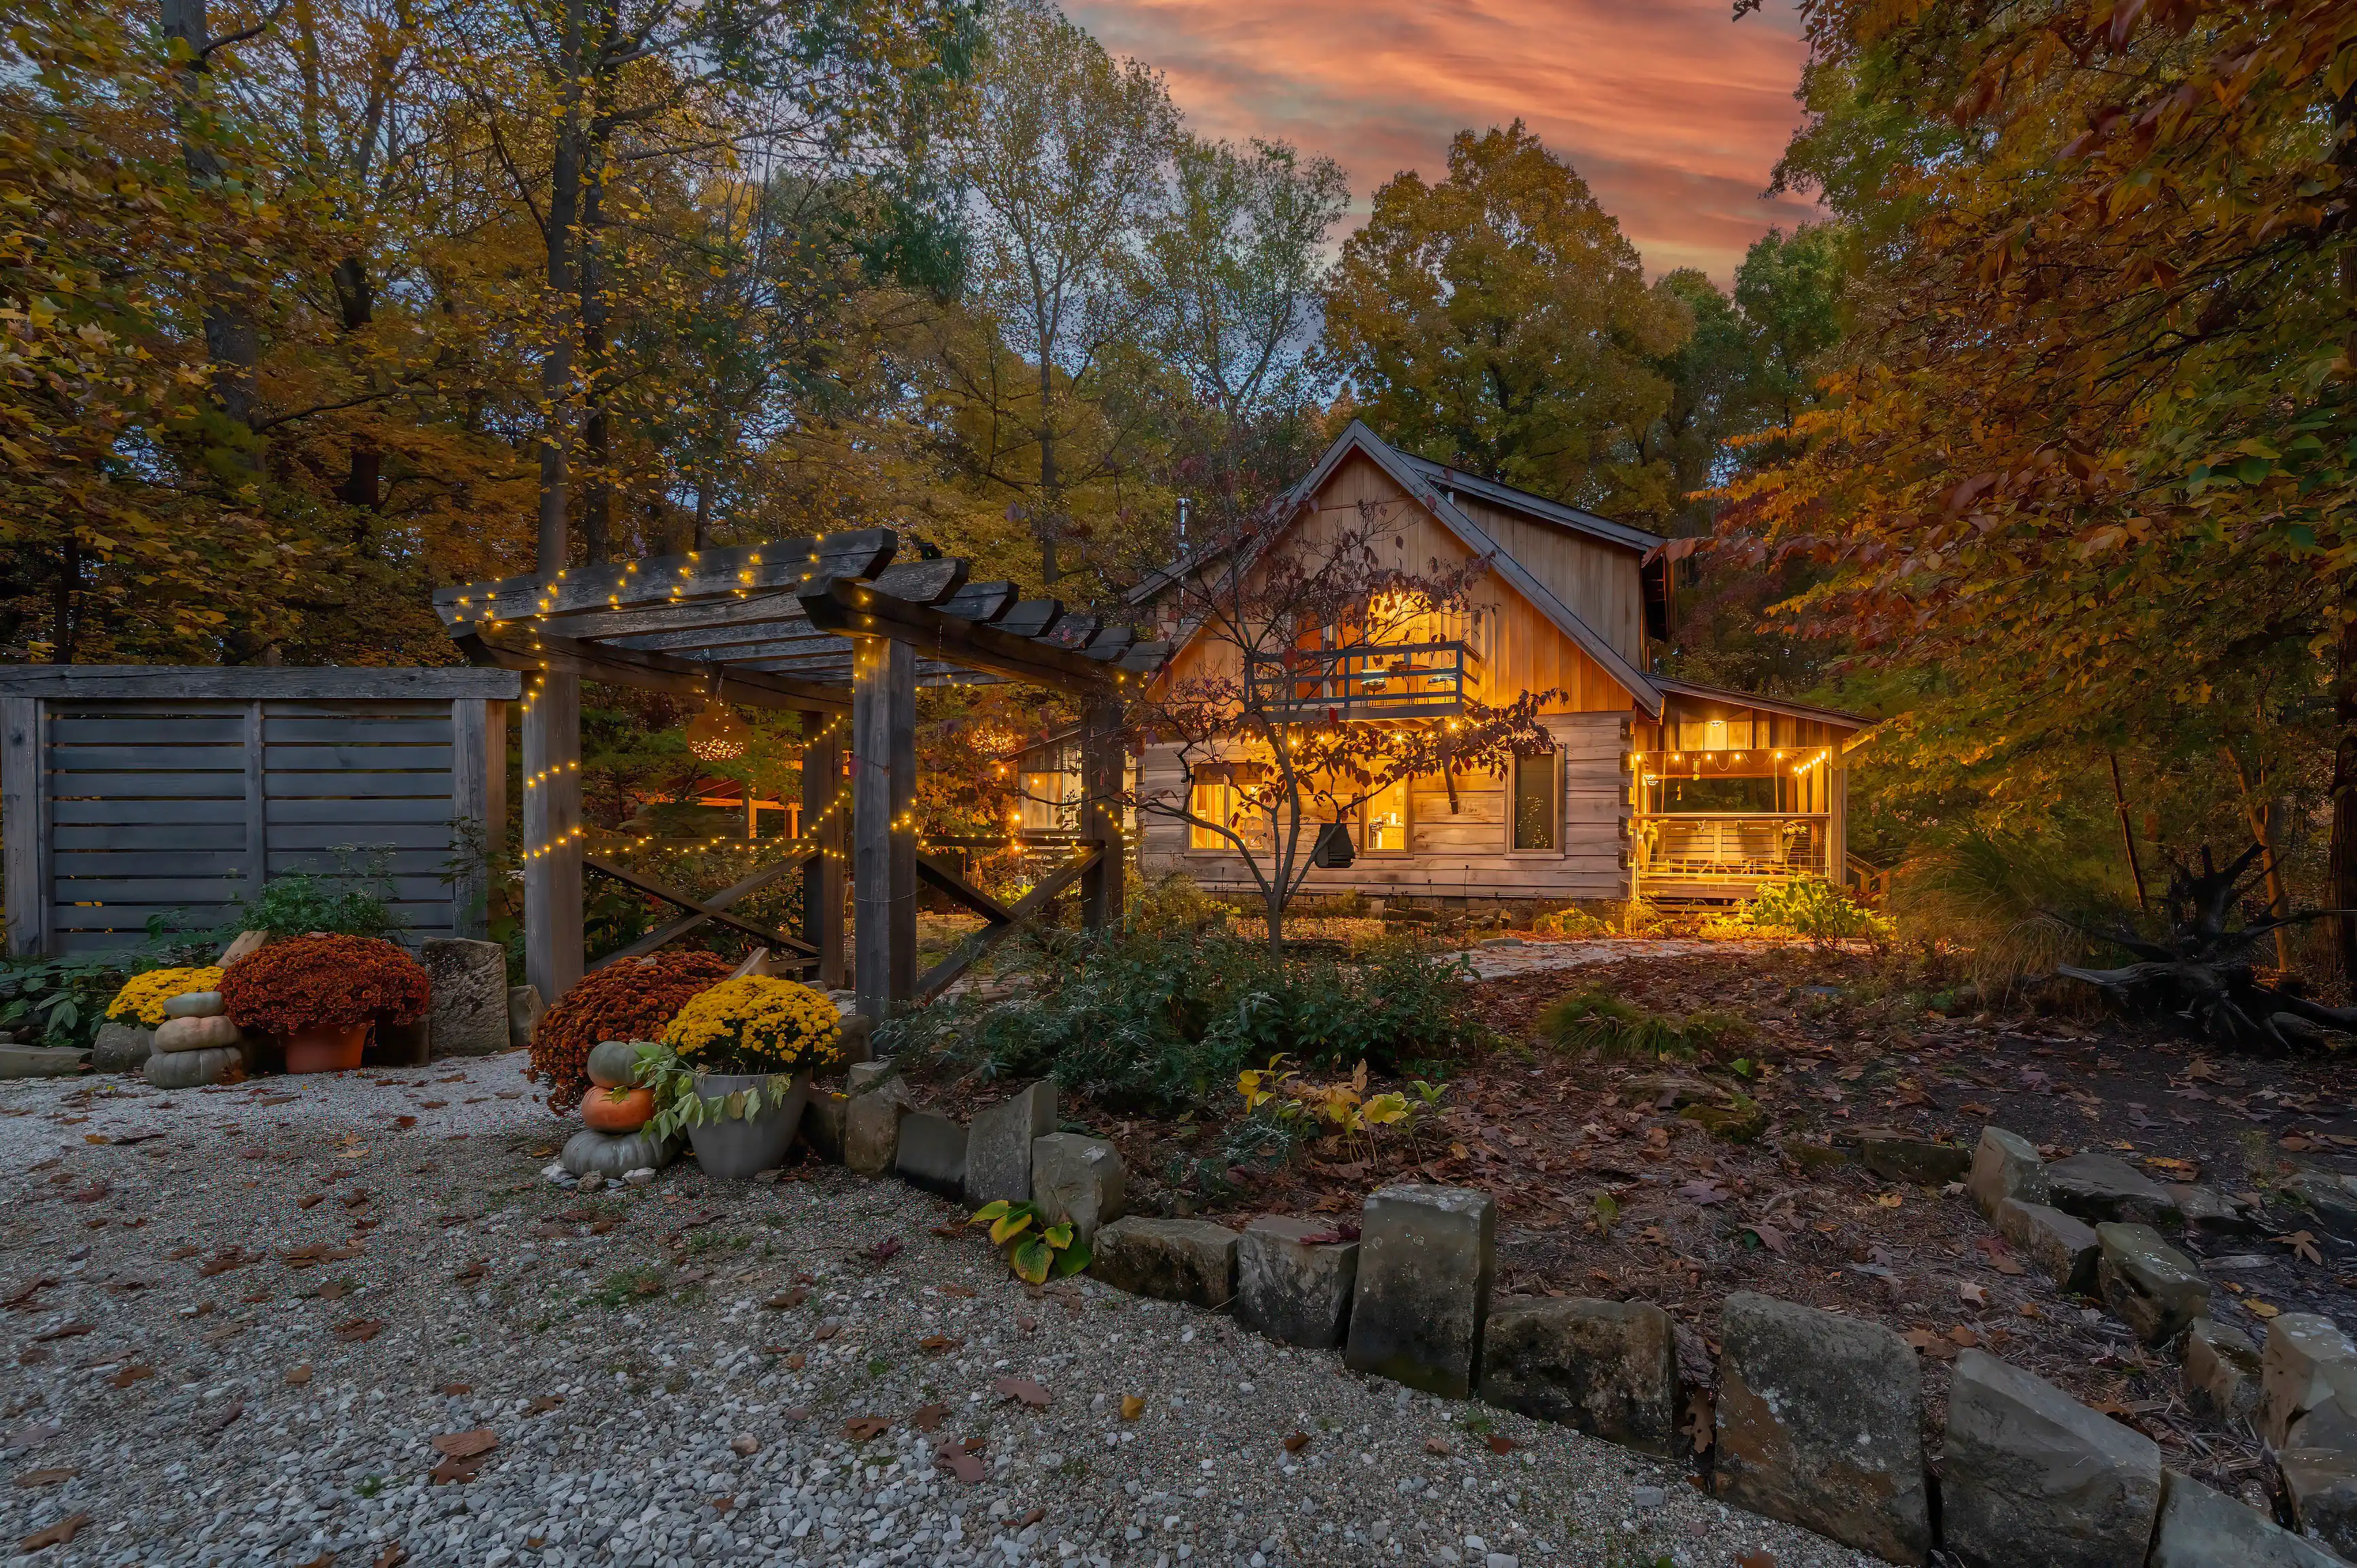 Cozy wooden cabin with warm lights at twilight surrounded by autumn foliage and decorated with potted mums and pumpkins.